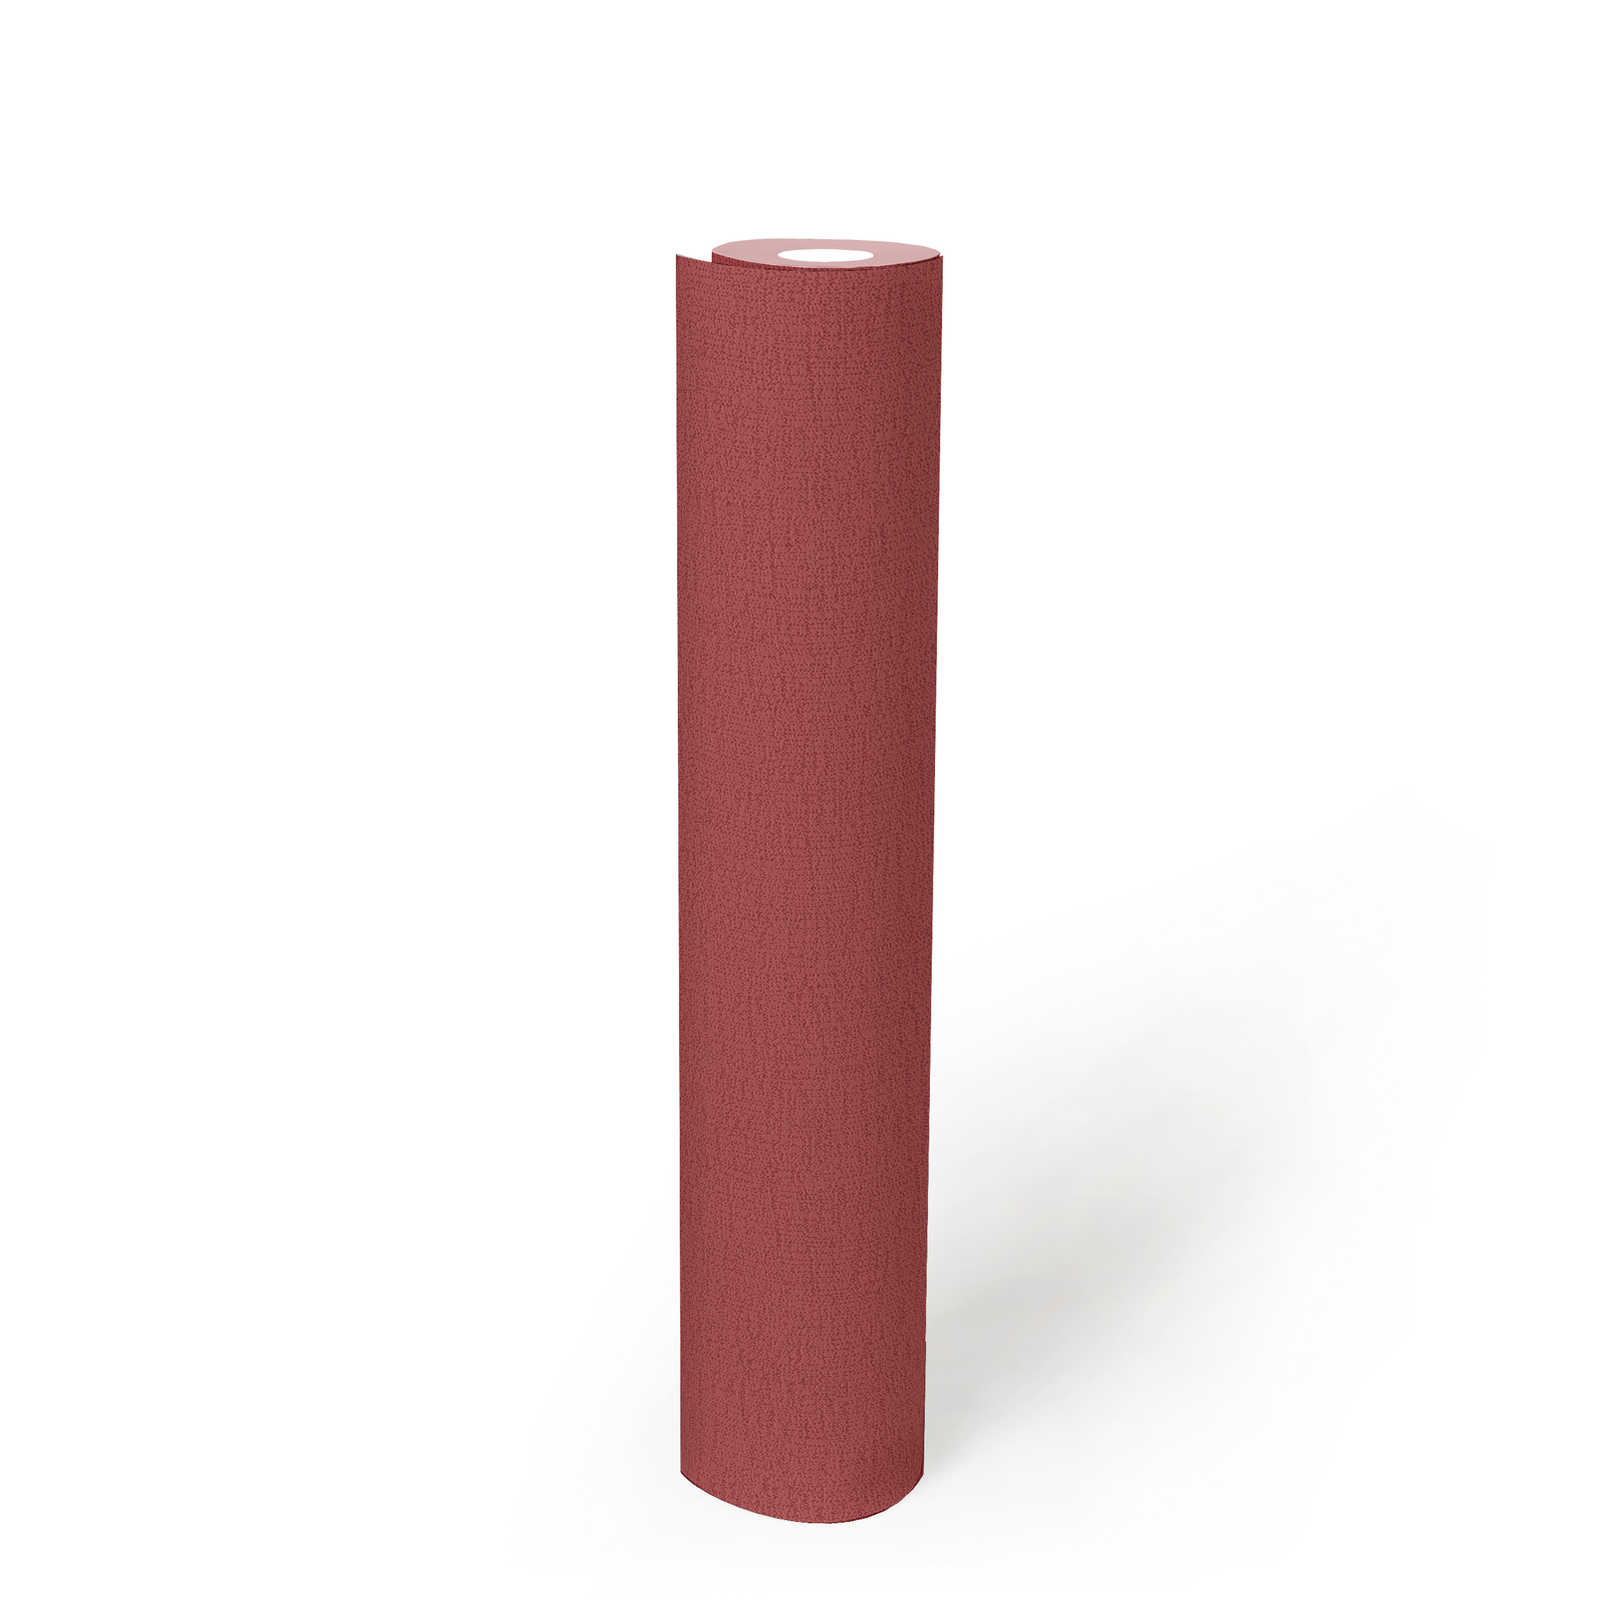             Non-woven wallpaper intense red with textured pattern - red
        